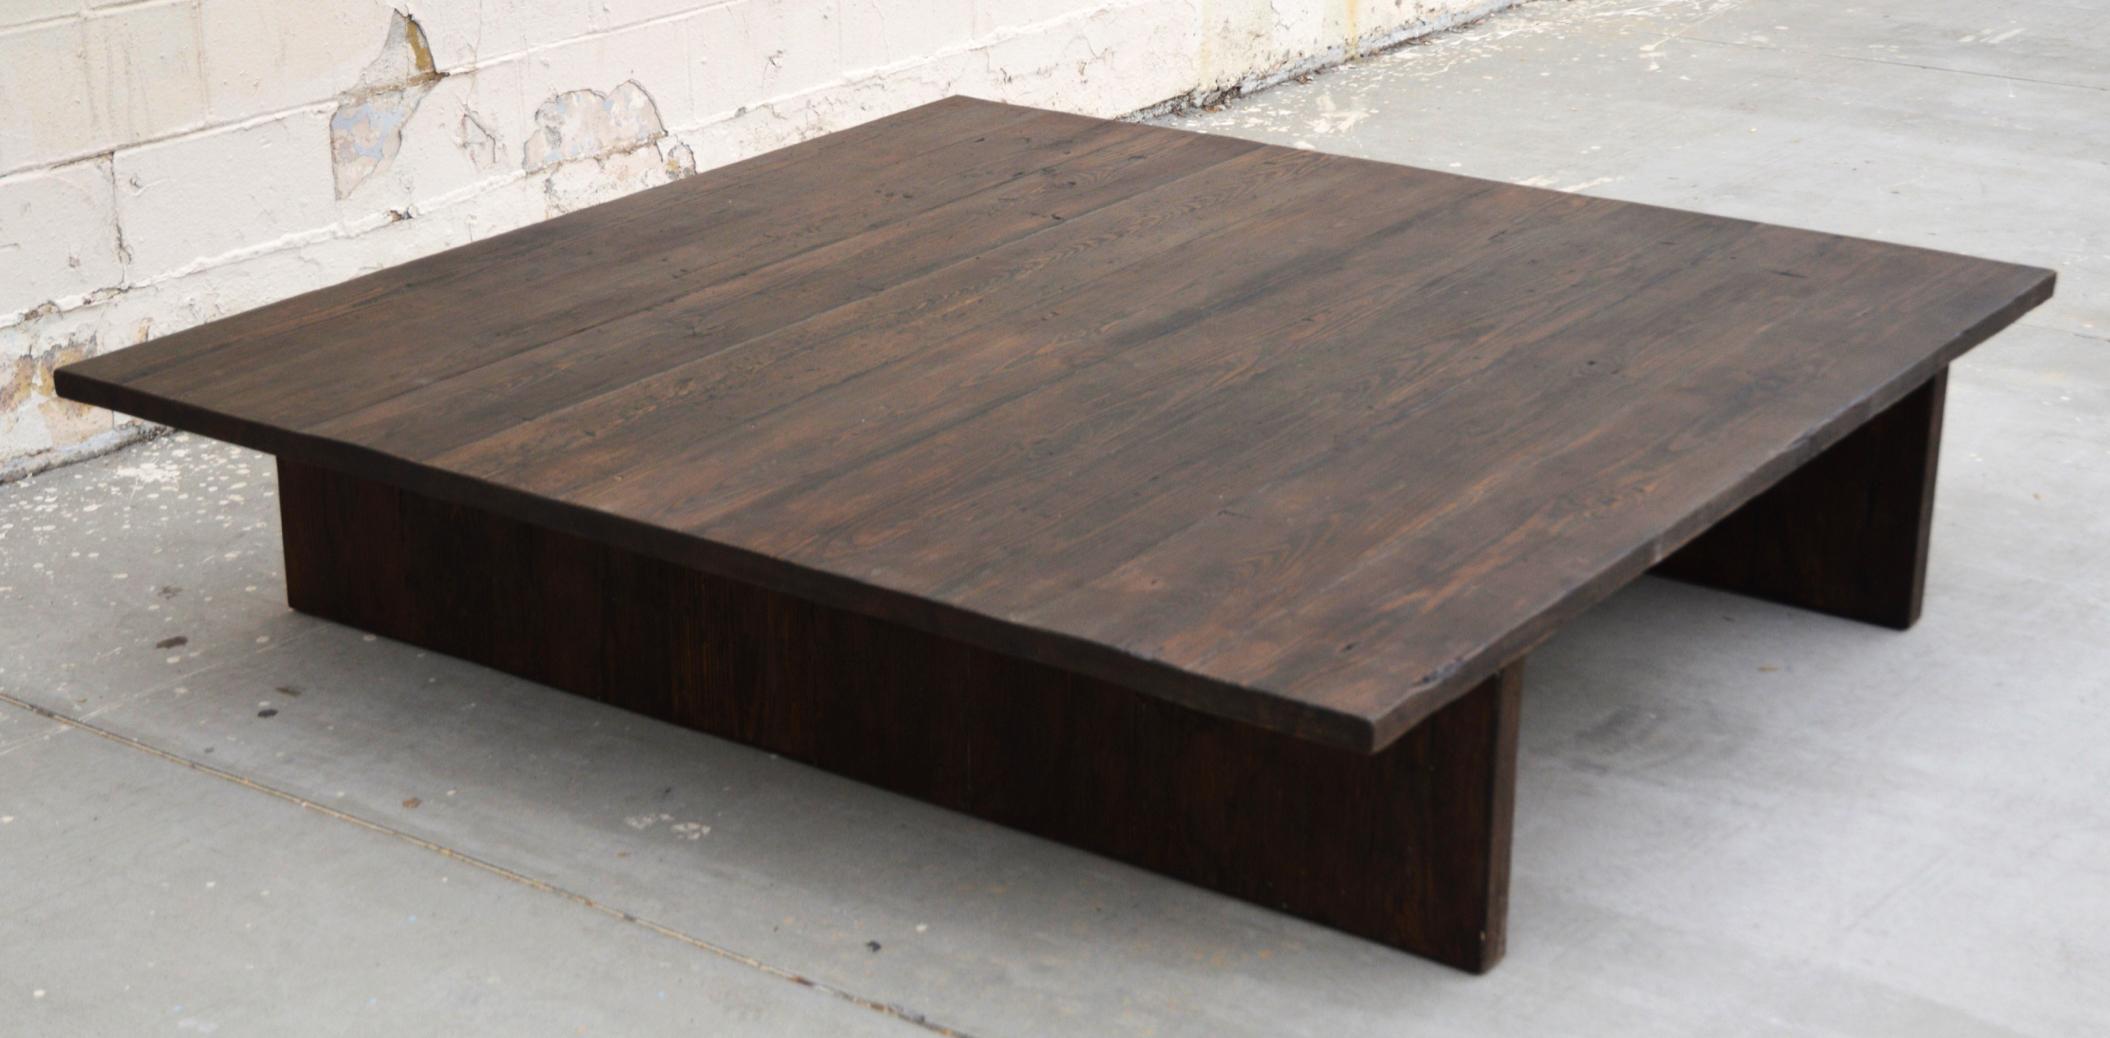 This oak coffee table is seen here in 60